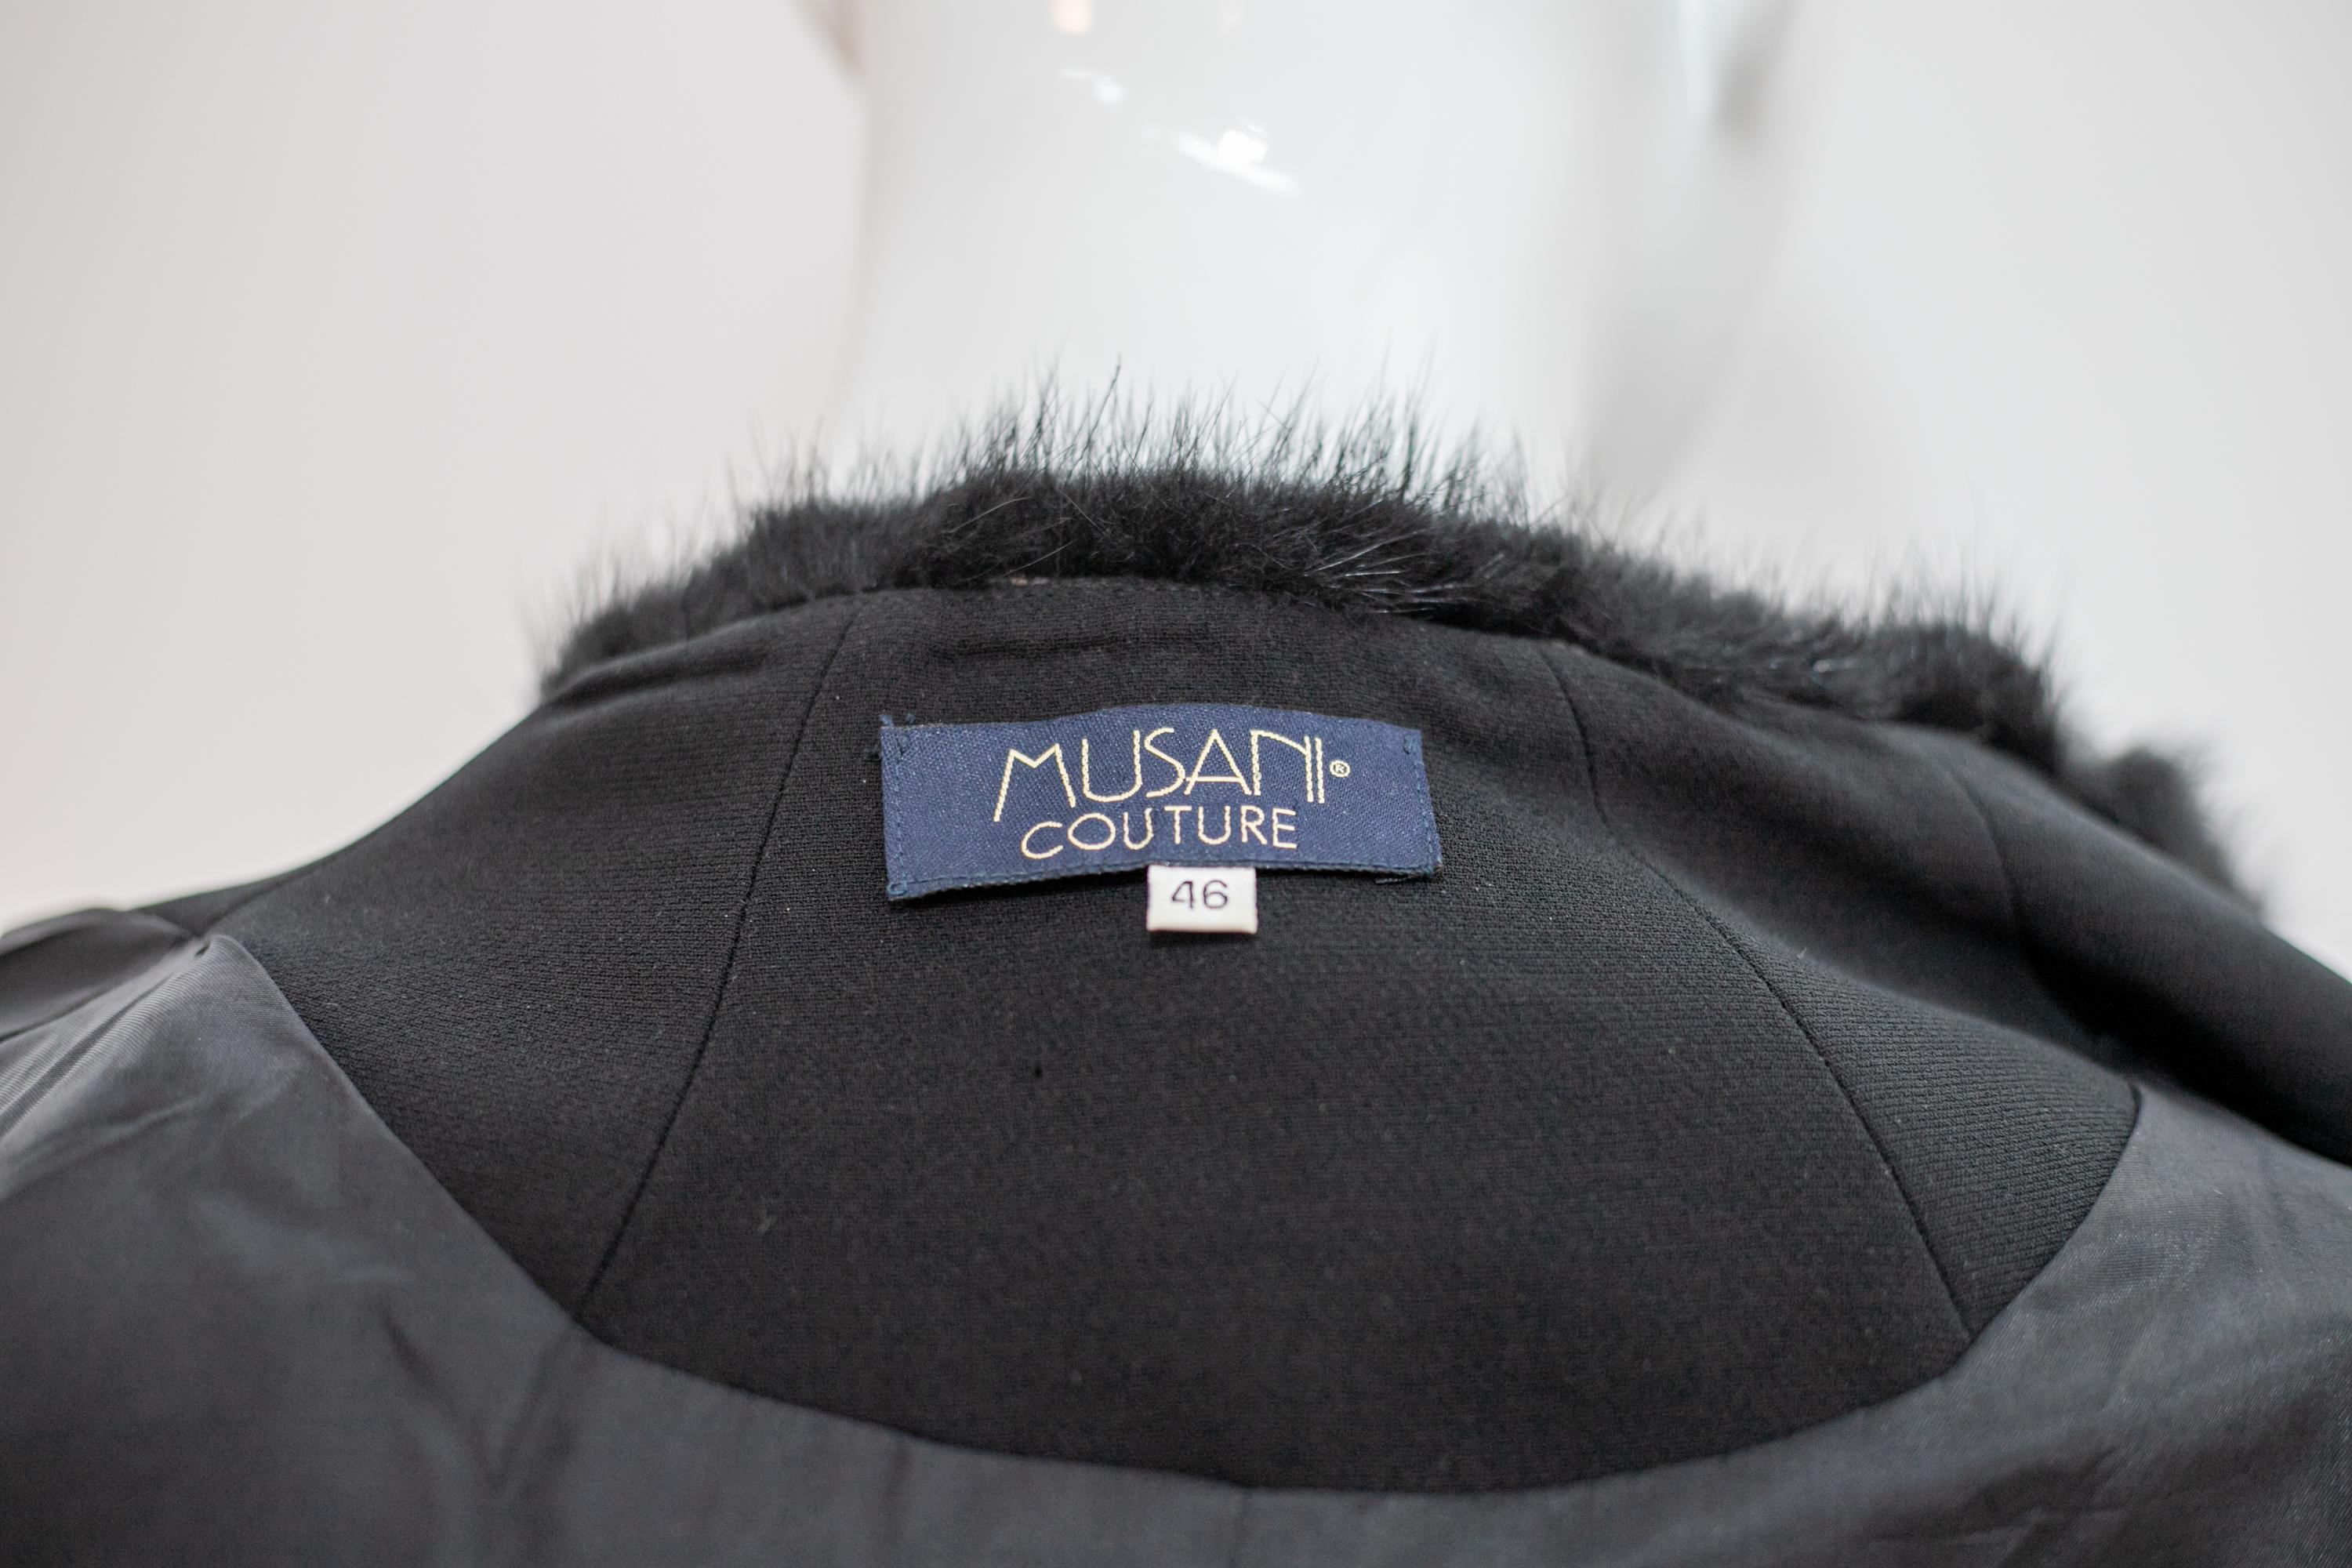 Estrous vintage wool coat from the 1980s by Musani, made in Italy.
ORIGINAL LABEL.
The coat is totally made of black wool and black fur and has long sleeves with wider cuffs, lined with fur at the wrist, definitely high. The collar has the classic